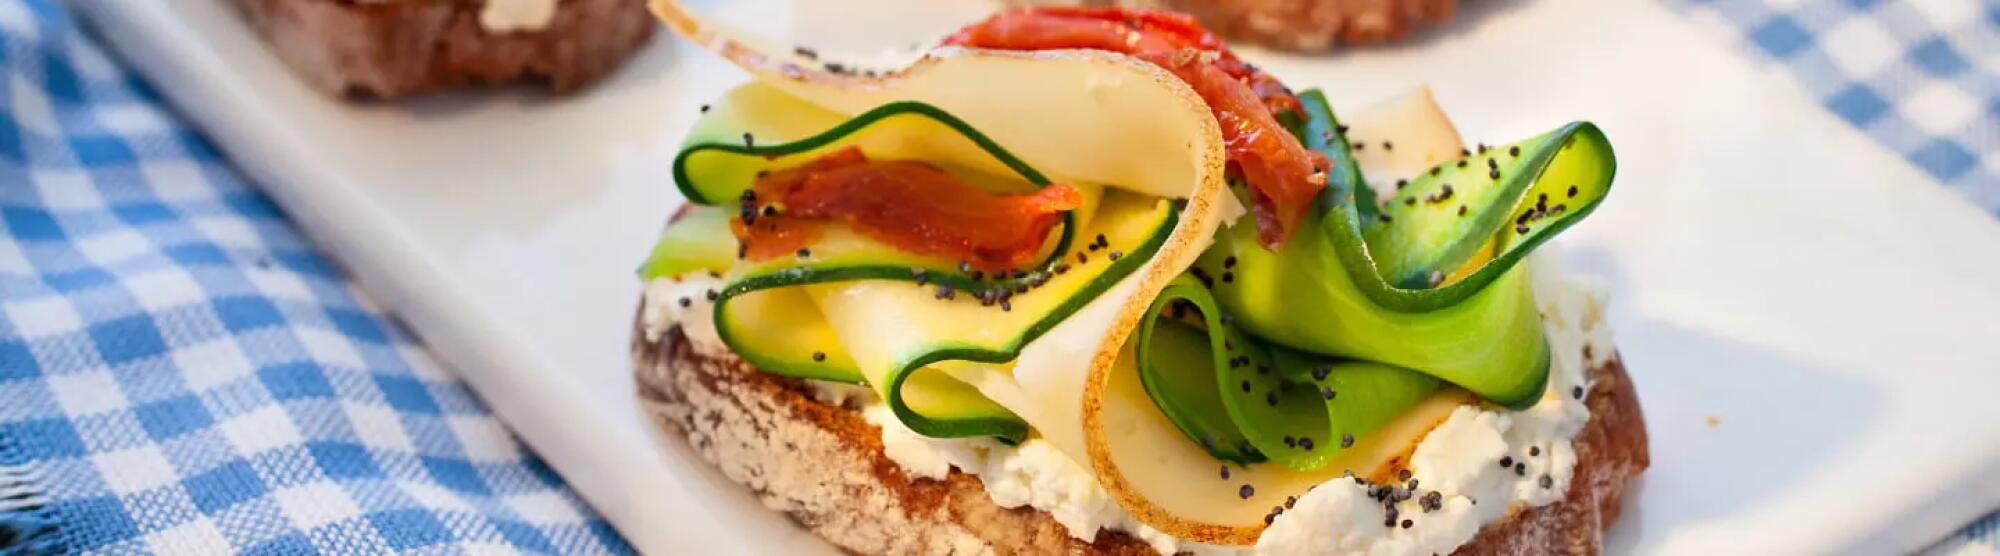 Recette : Toast tomate, courgette et fromage